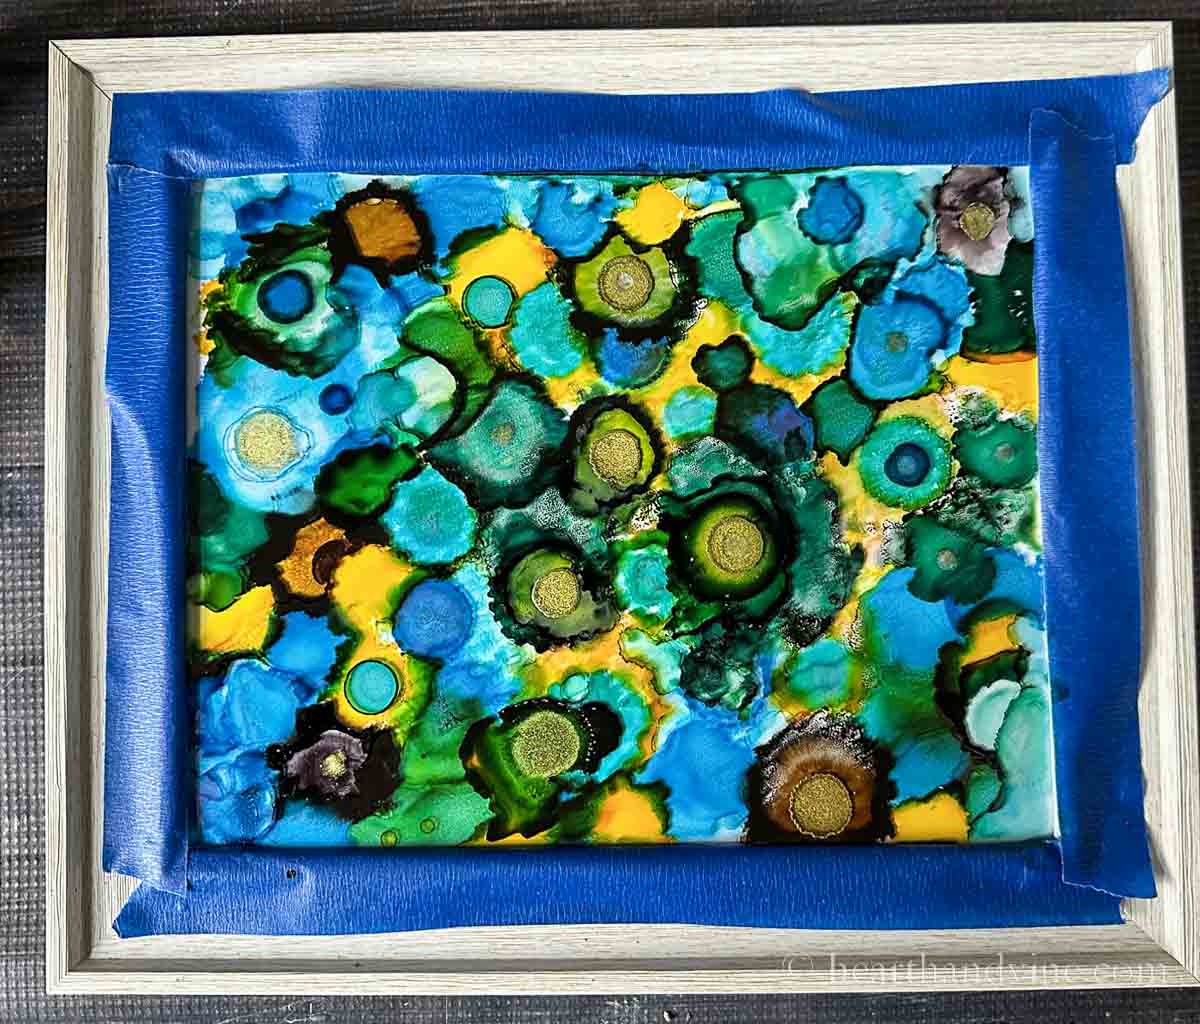 Finished alcohol ink on glass painting with tape still on.